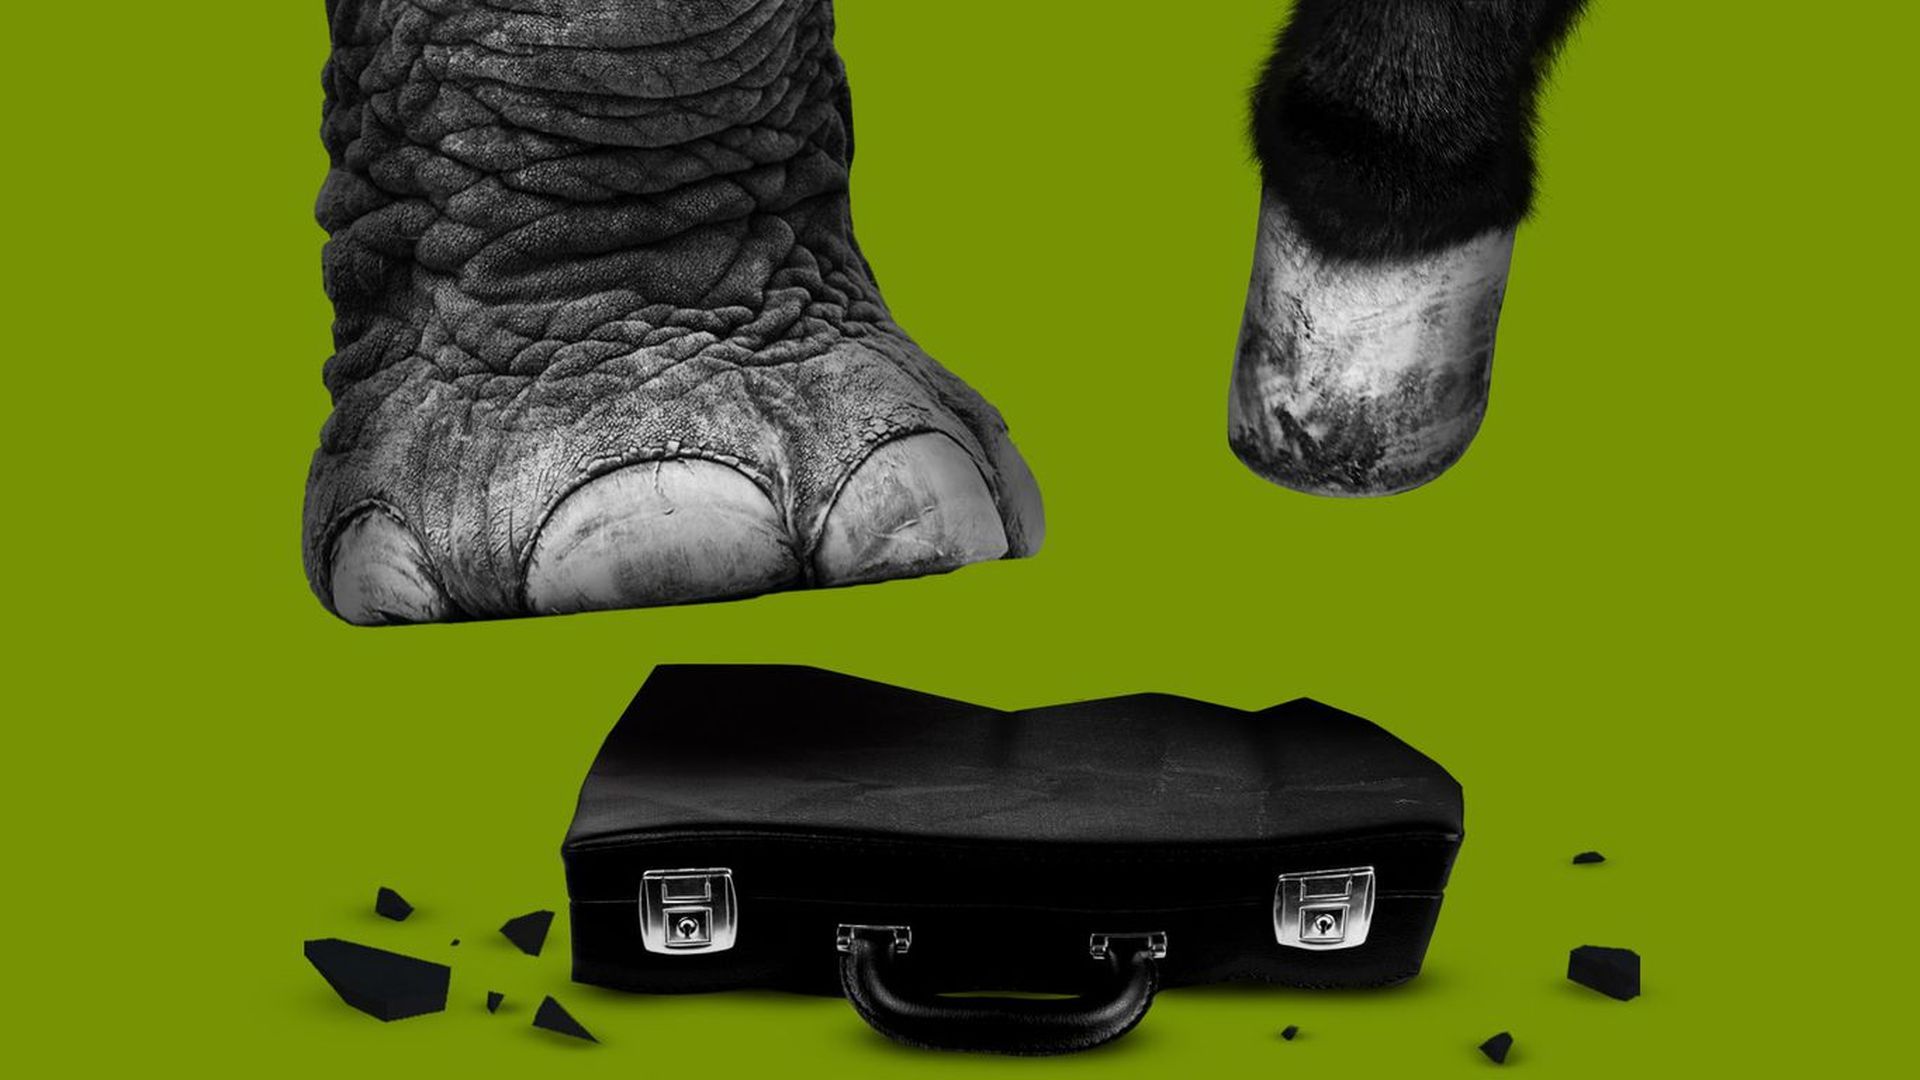 An elephant stomping on a briefcase